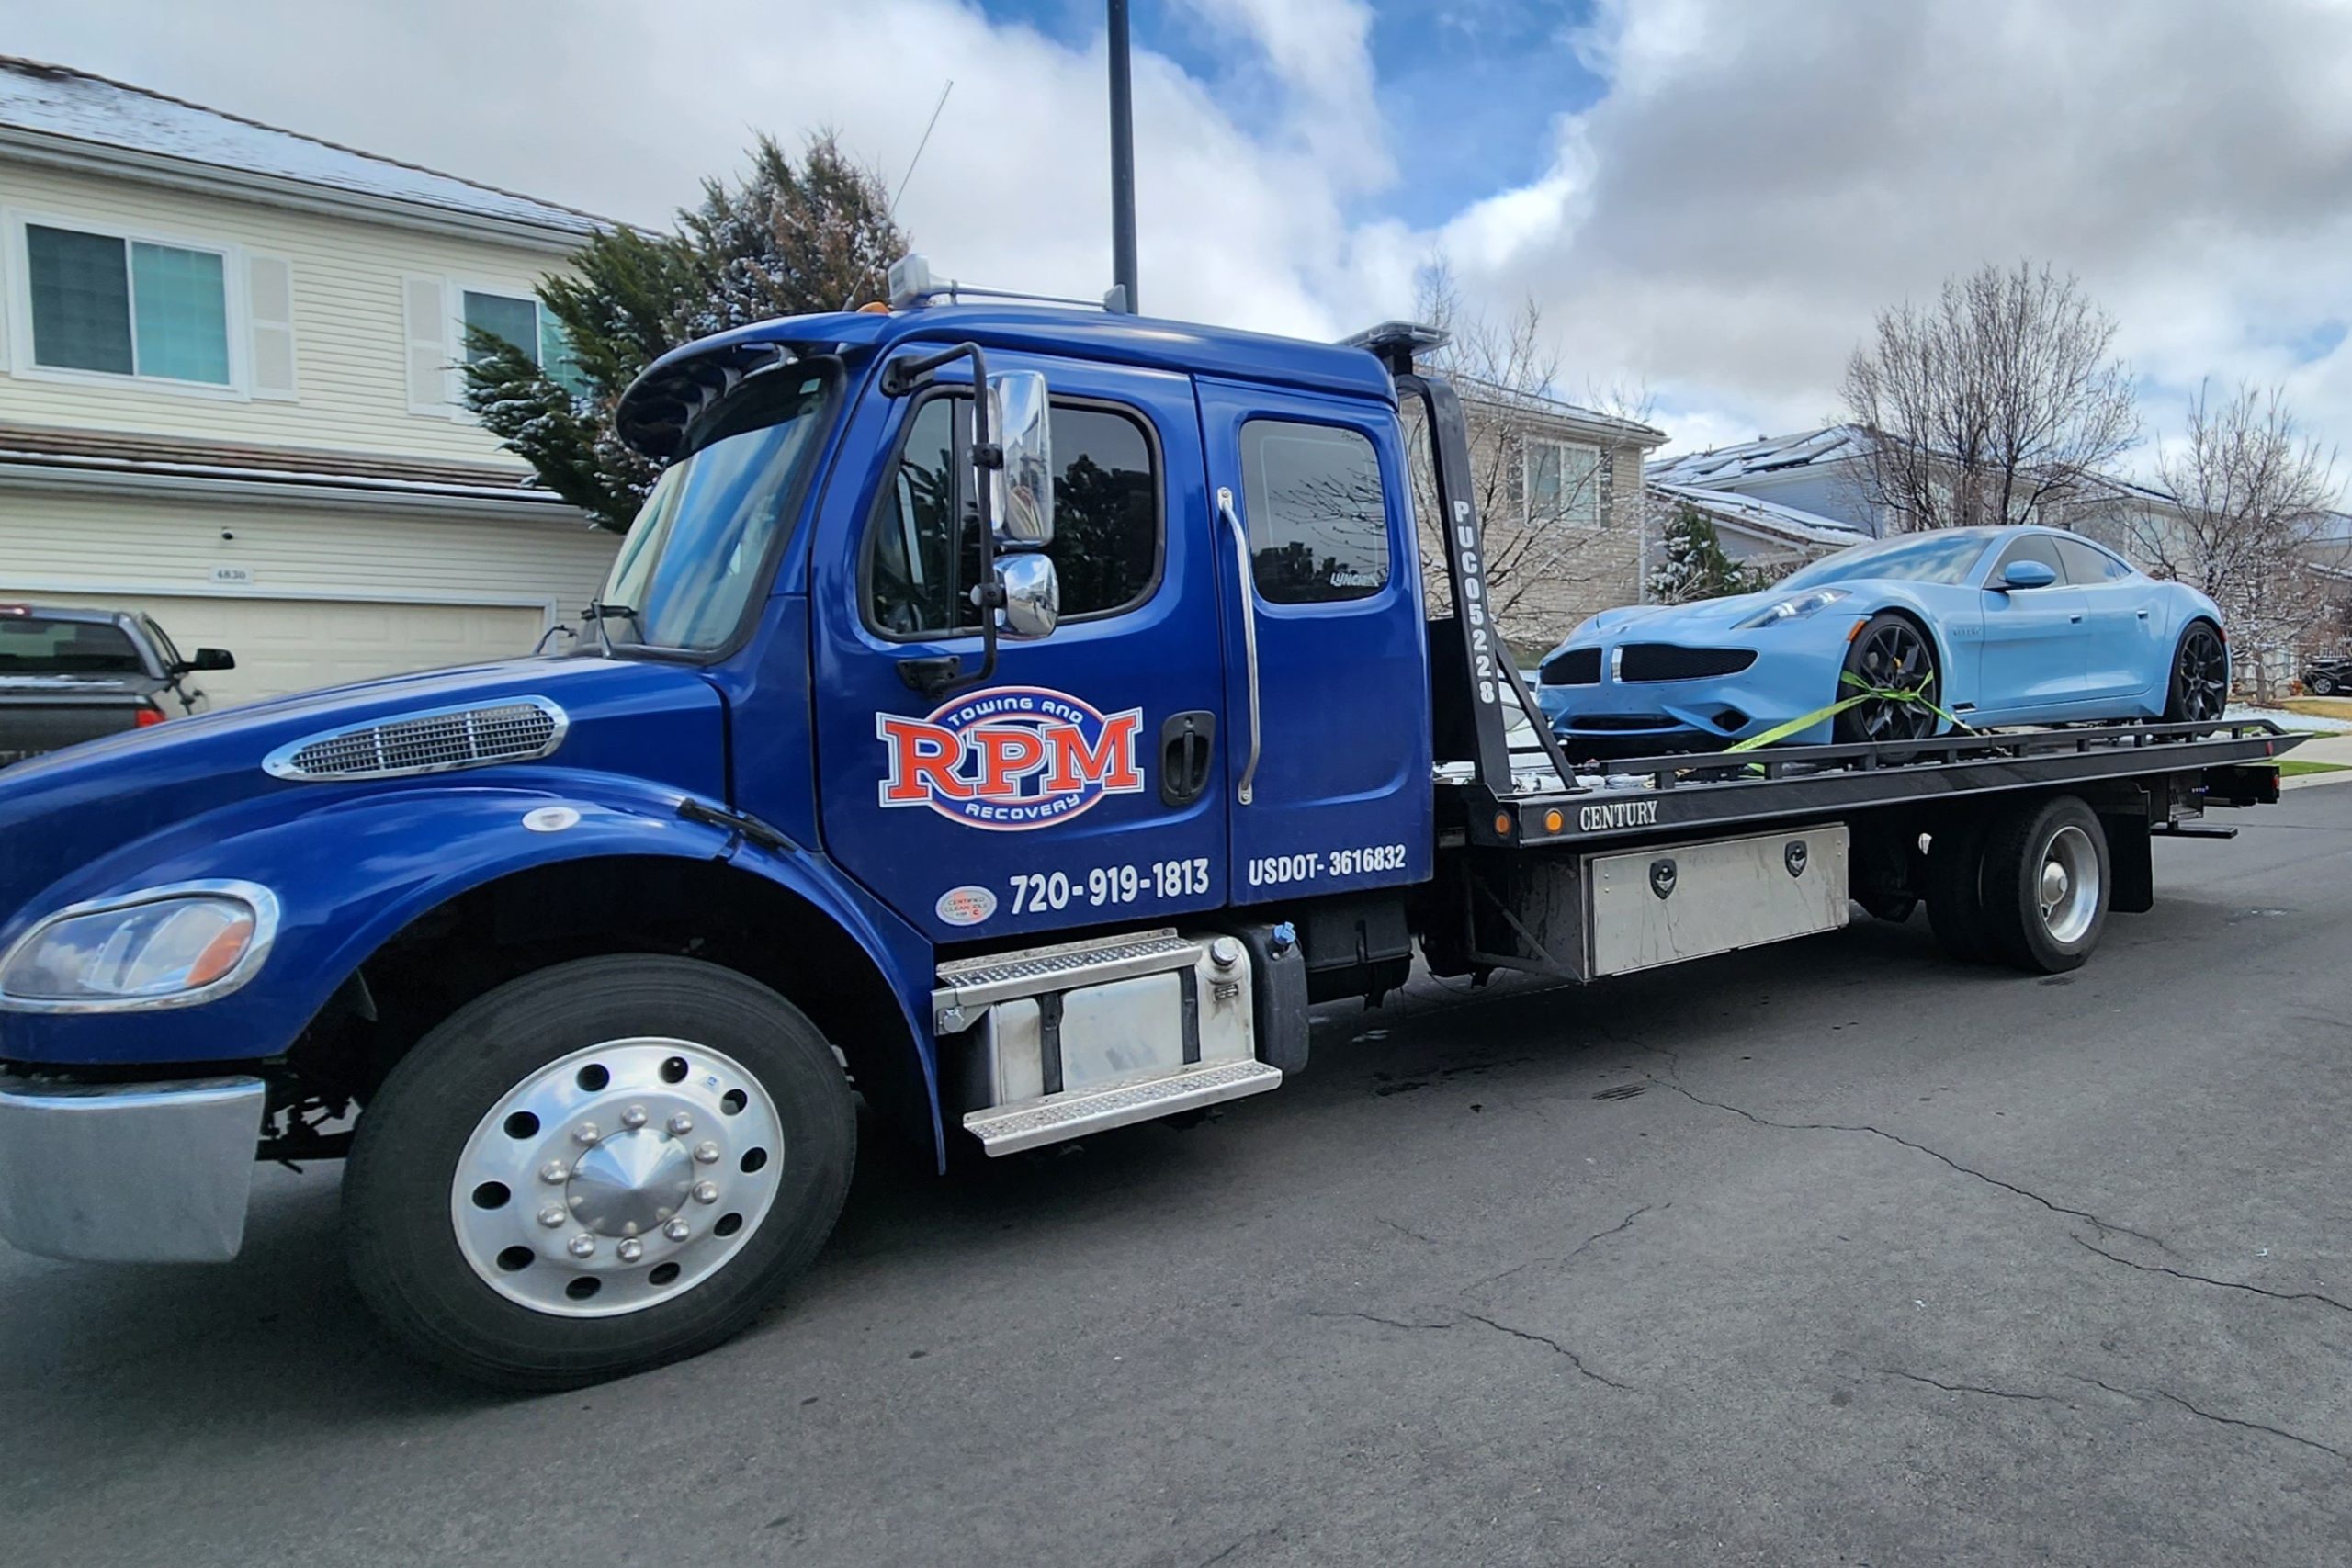 this image shows towing services in Littleton, CO